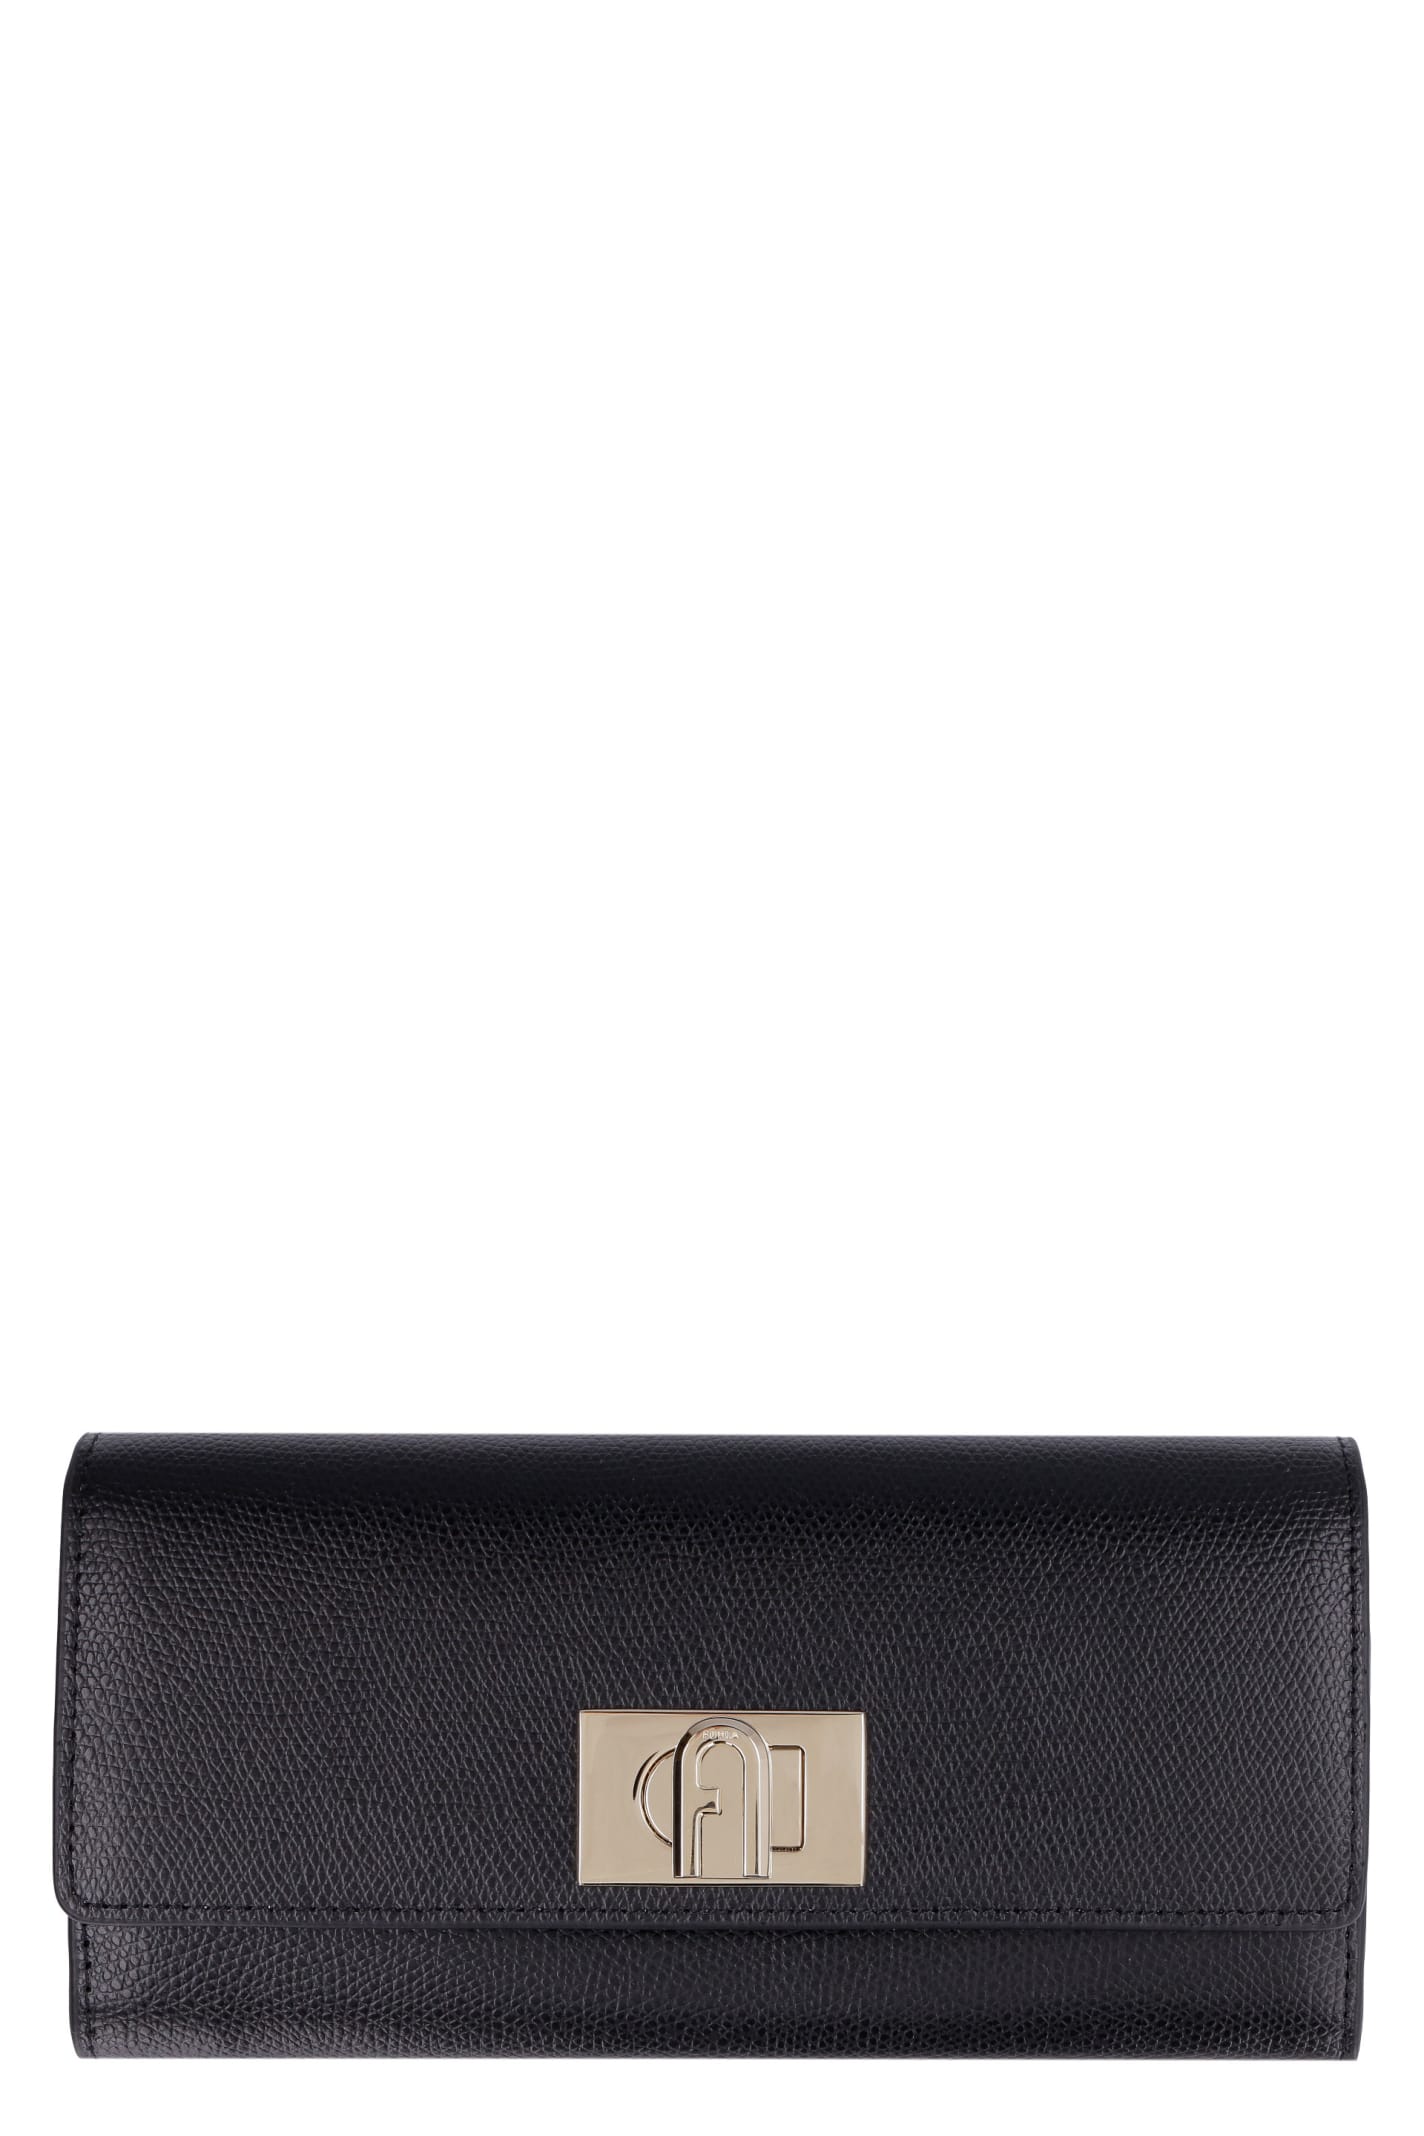 Furla 1927 Leather Continental Wallet